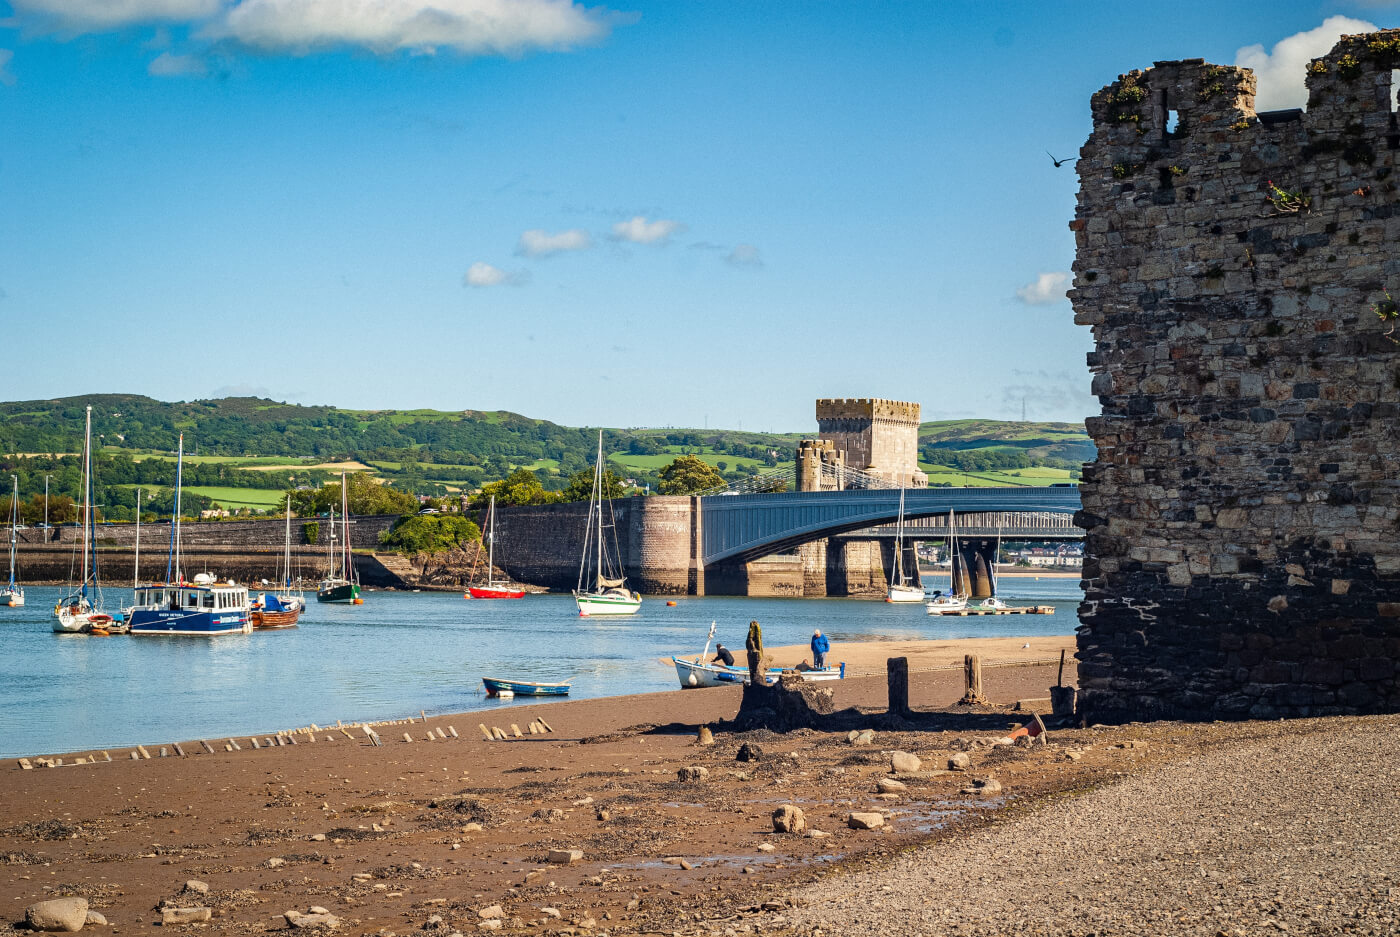 Image of a beach with views of docked boats, Conwy Bridge and part of the castle.